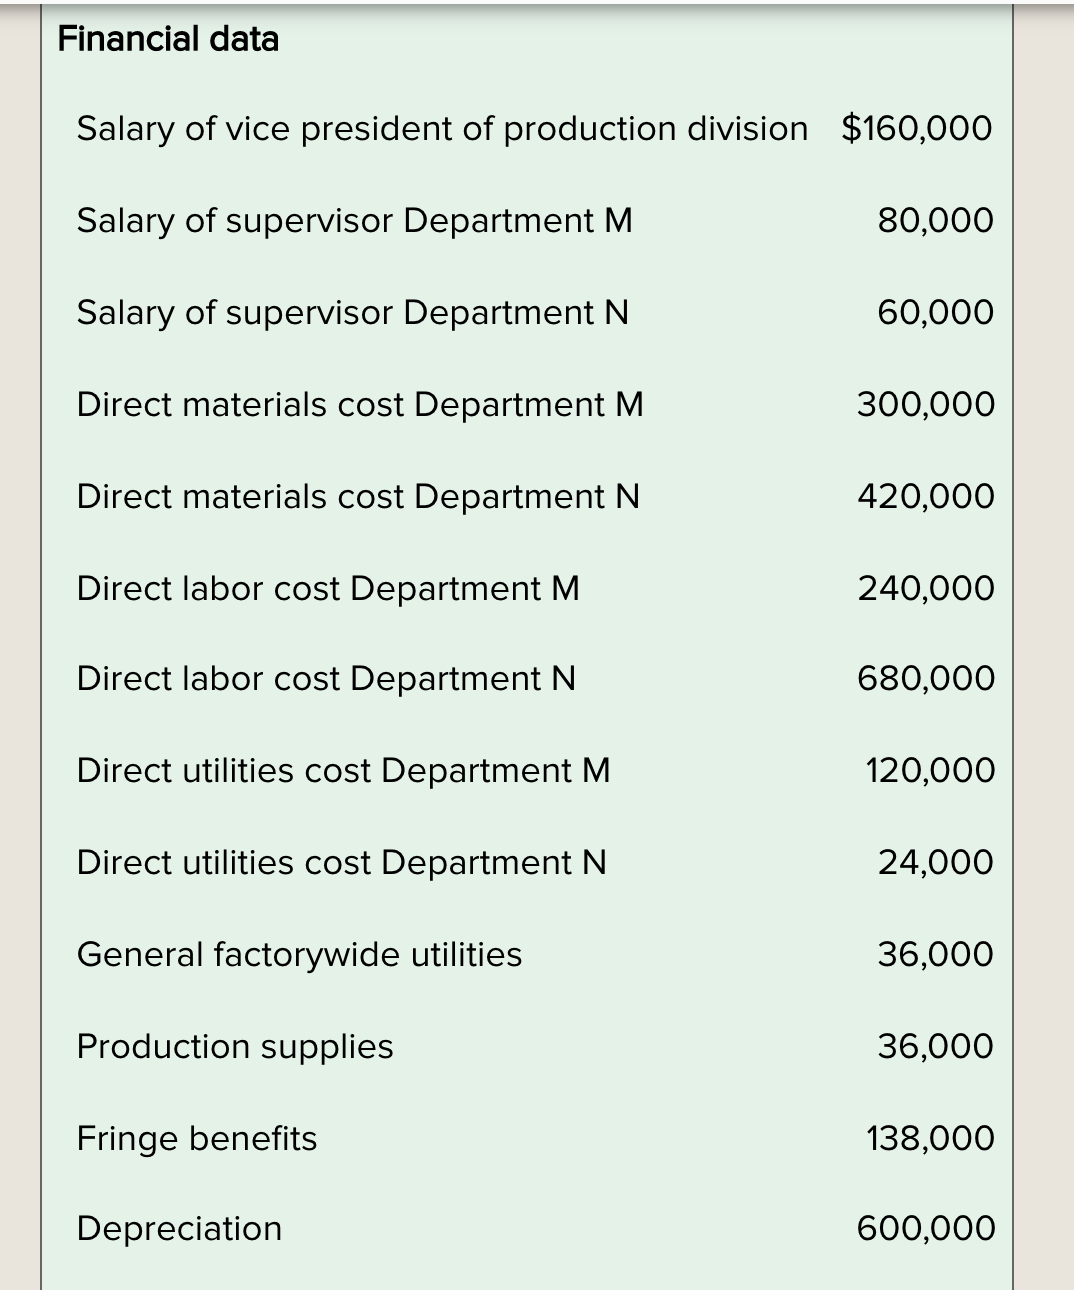 Financial data
Salary of vice president of production division $160,000
Salary of supervisor Department M
80,000
Salary of supervisor Department N
60,000
Direct materials cost Department M
300,000
Direct materials cost Department N
420,000
Direct labor cost Department M
240,000
Direct labor cost Department N
680,000
Direct utilities cost Department M
120,000
Direct utilities cost Department N
24,000
General factorywide utilities
36,000
Production supplies
36,000
Fringe benefits
138,000
Depreciation
600,000
